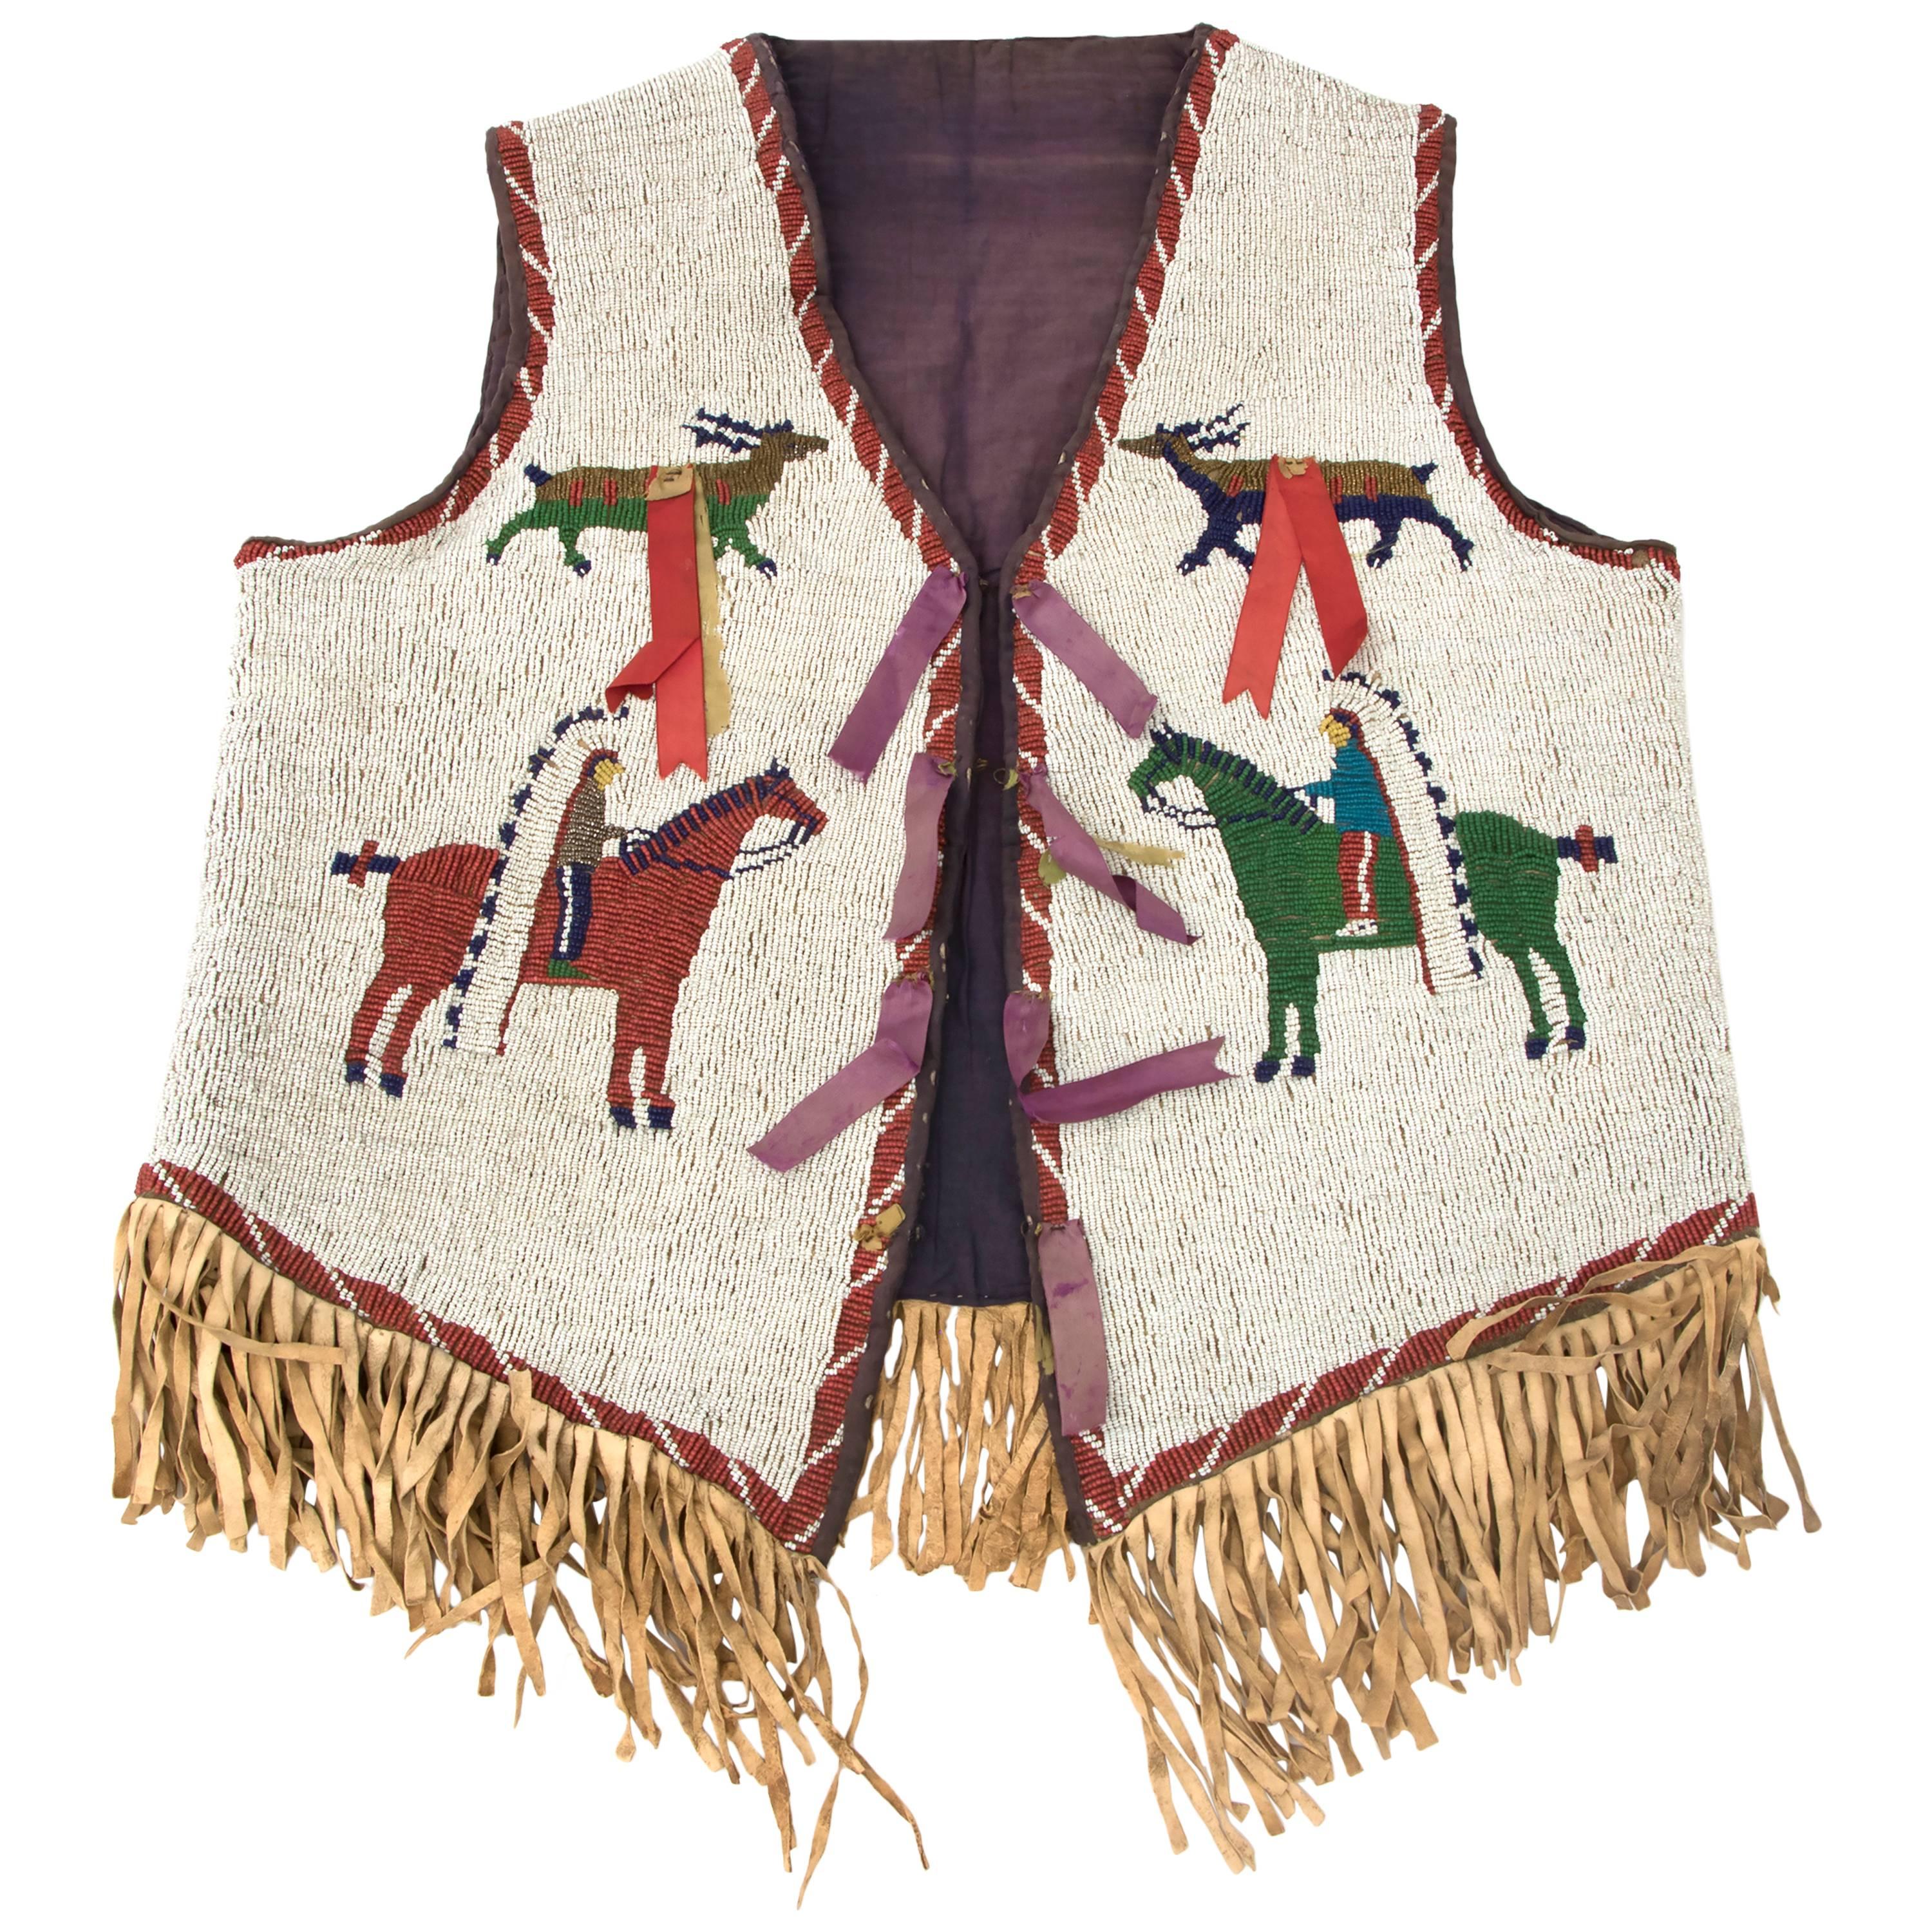 Antique Native American Pictorial Beaded Vest, Sioux, circa 1900